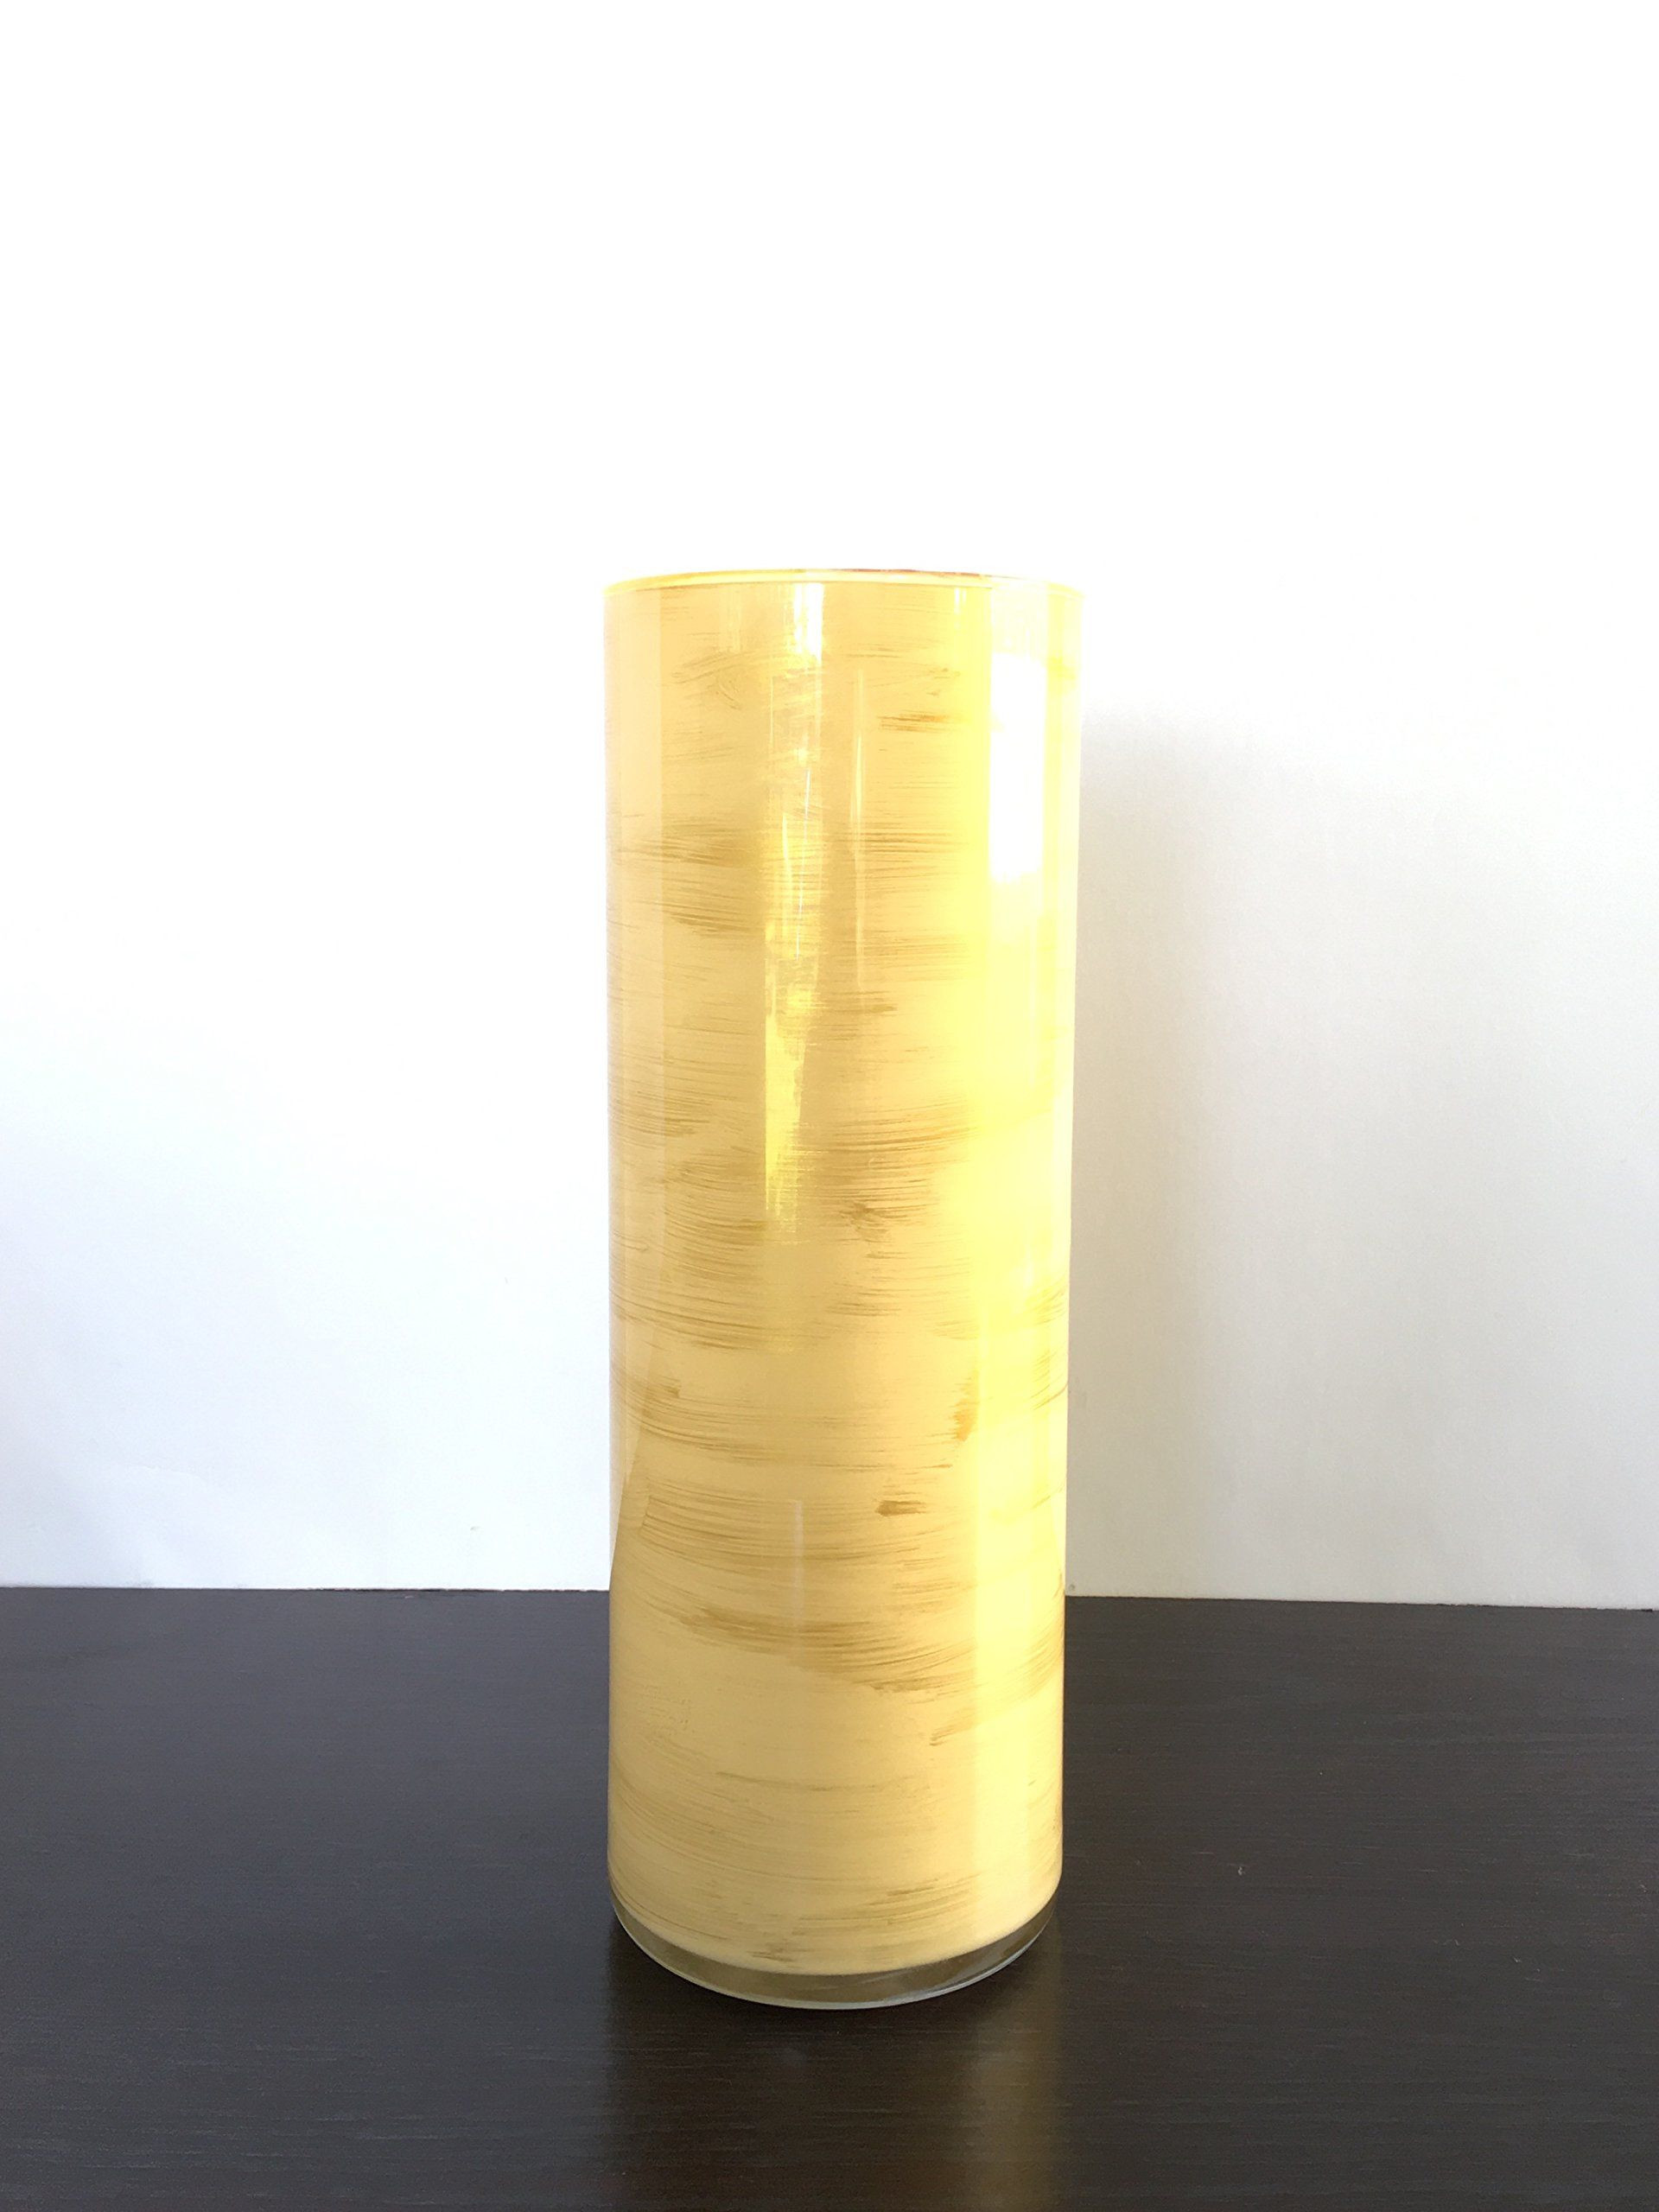 24 Stylish Glass Vase with Hole for Lights 2024 free download glass vase with hole for lights of pale orange vase hand painted glass light orange and metallic with regard to pale orange vase hand painted glass light orange and metallic gold my work is 